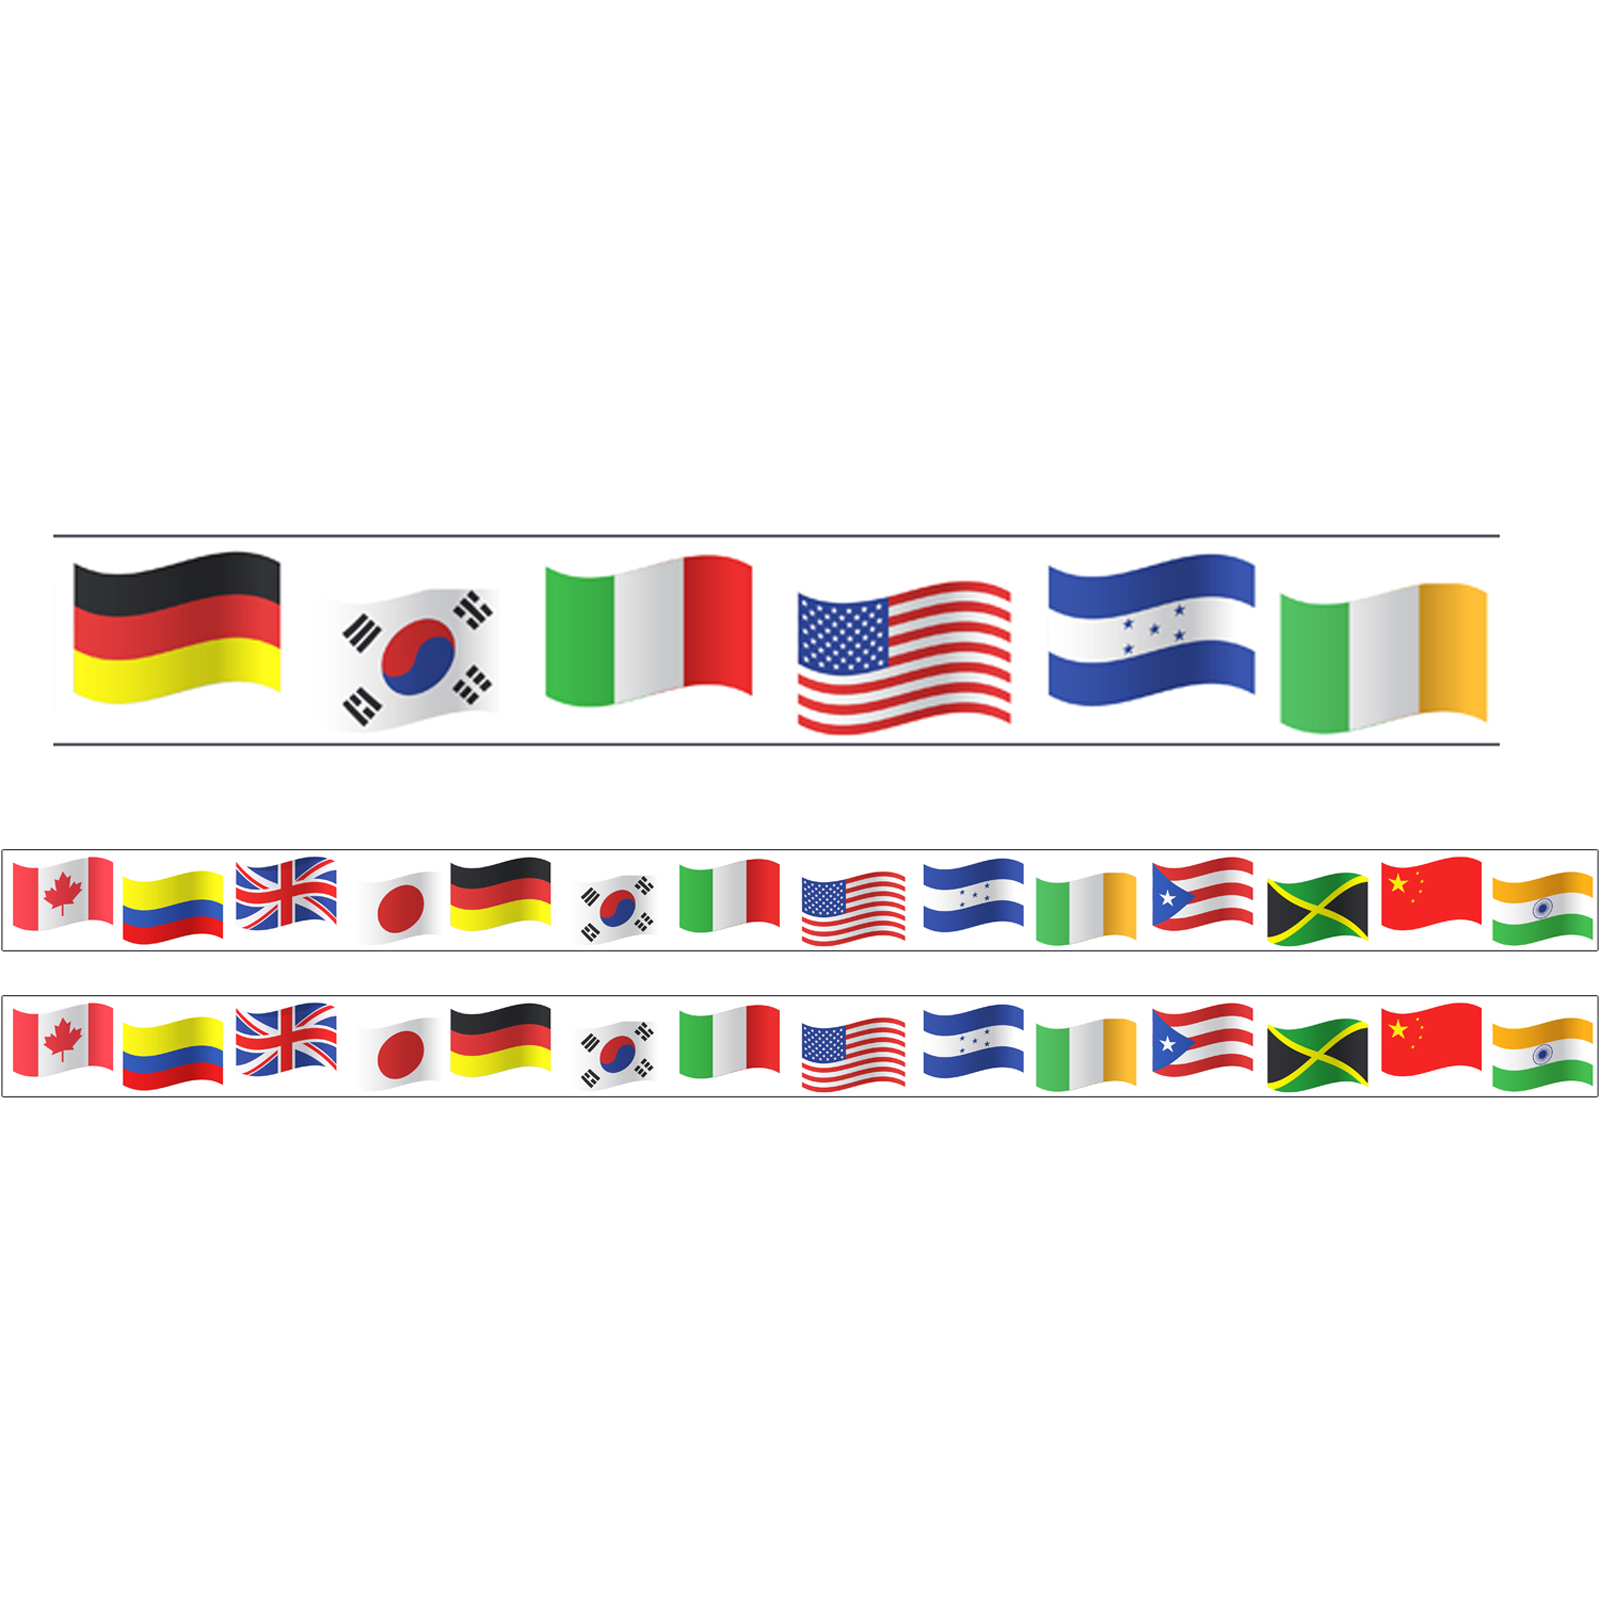 Borders/Trims, Magnetic, Rectangle Cut - 1-1/2" x 24", World Flags Theme, 24' per Pack, 2 Packs